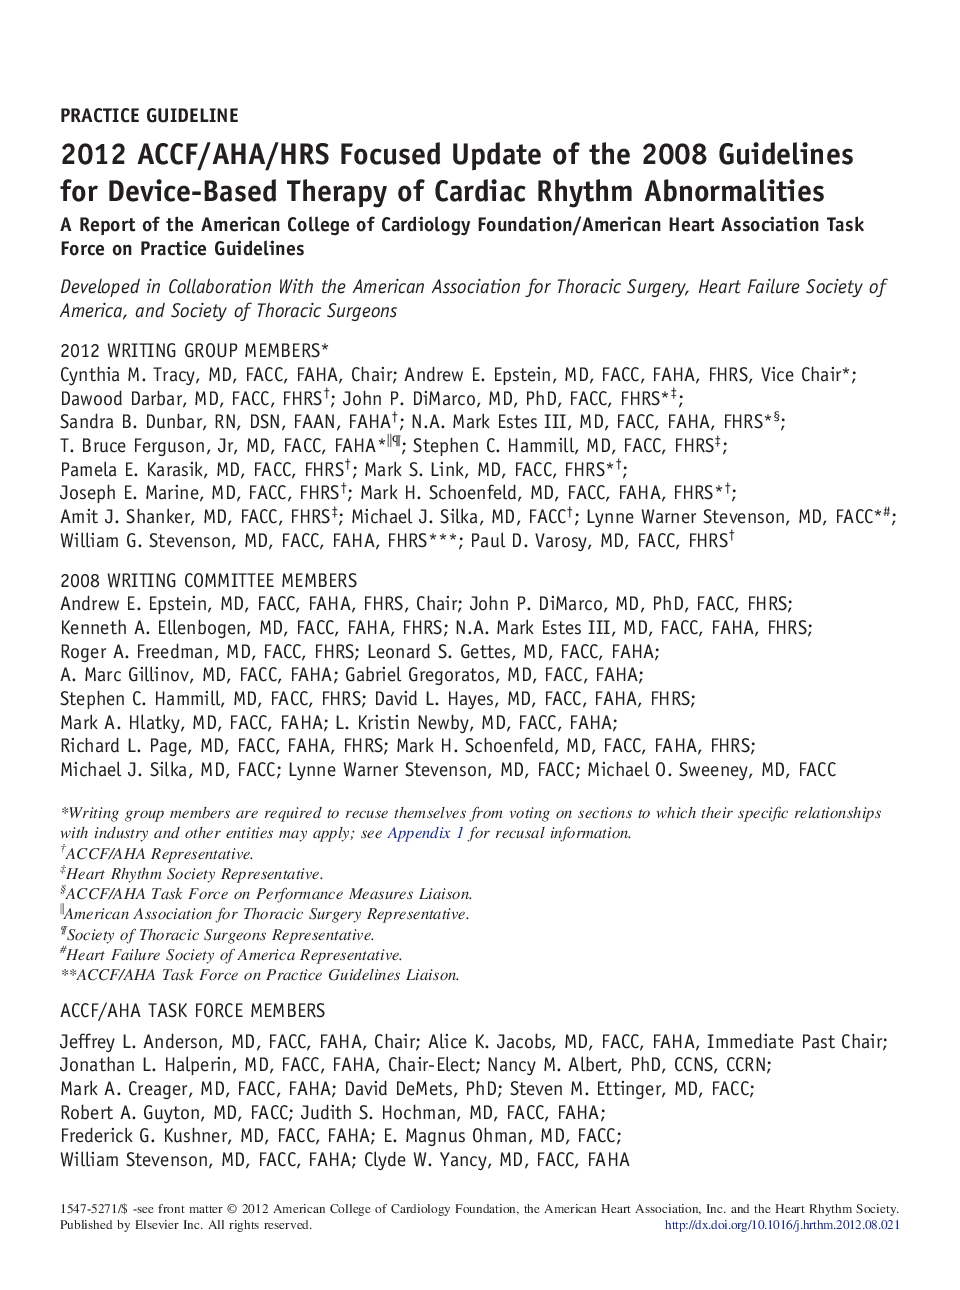 2012 ACCF/AHA/HRS Focused Update of the 2008 Guidelines for Device-Based Therapy of Cardiac Rhythm Abnormalities